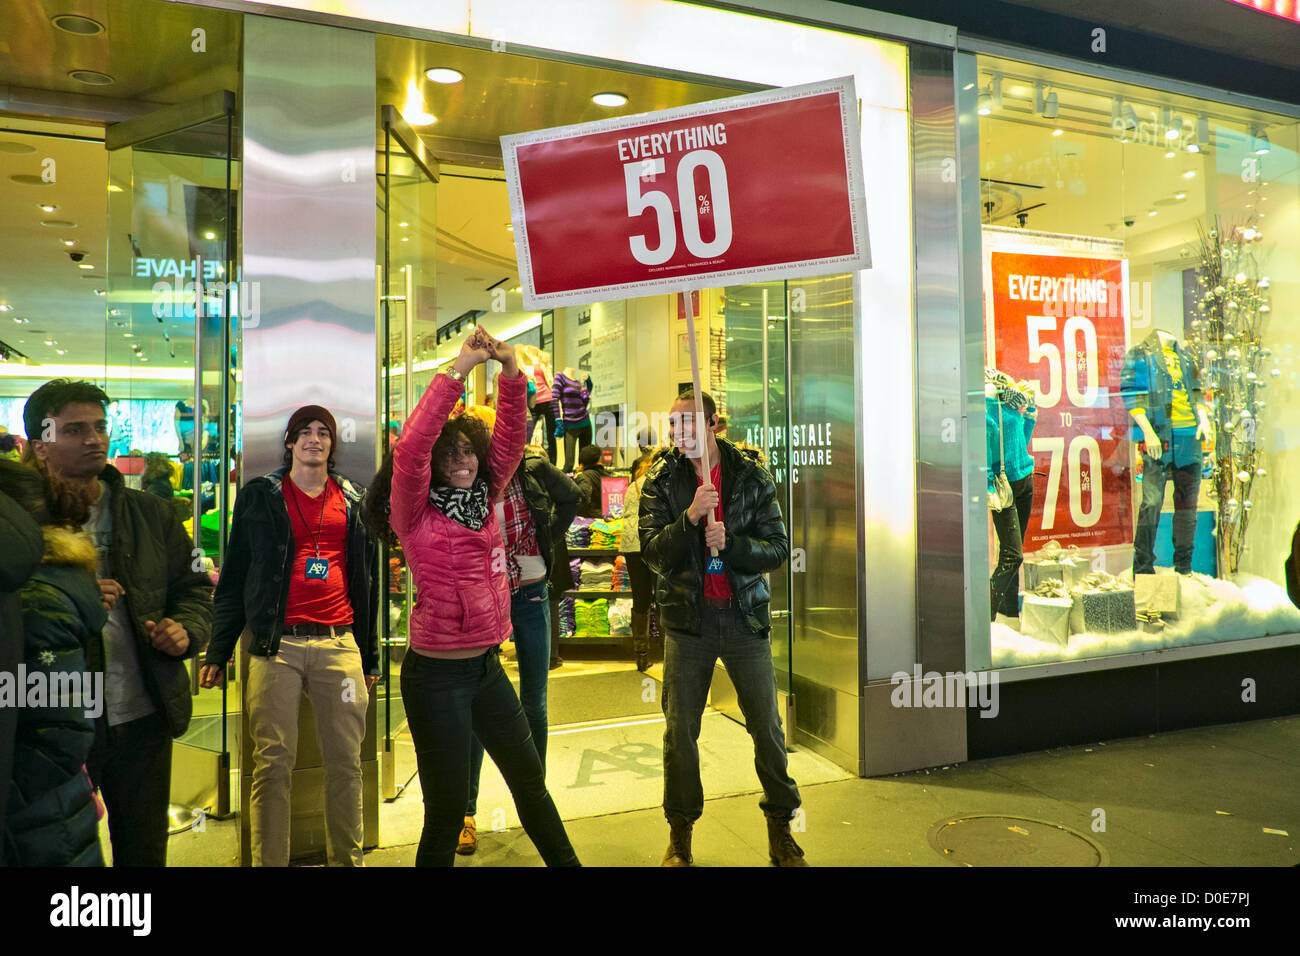 November 22, 2012, New York, NY.  A young woman dances in front of signs advertising 50% off at the Aeropostale store in New York's Times Square, which, like many stores, was open on the Thanksgiving Day holiday Stock Photo